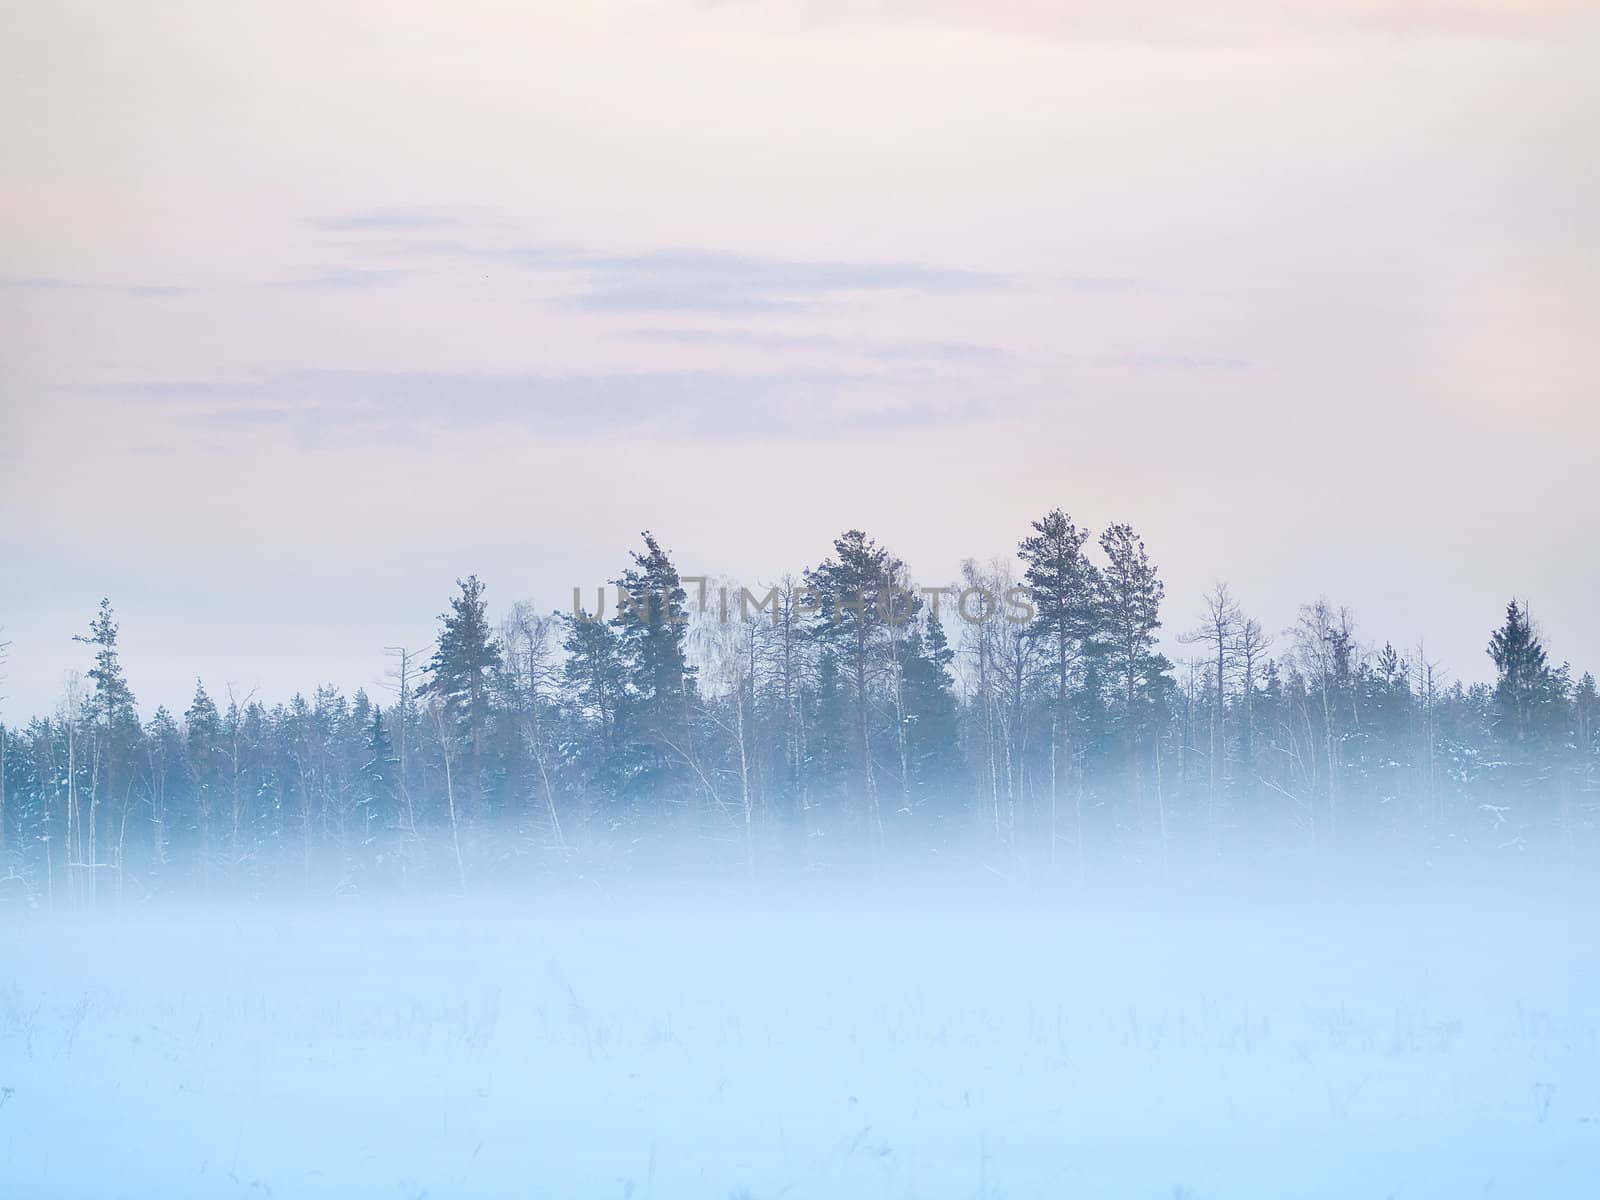 Winter field with trees in fog by kvinoz